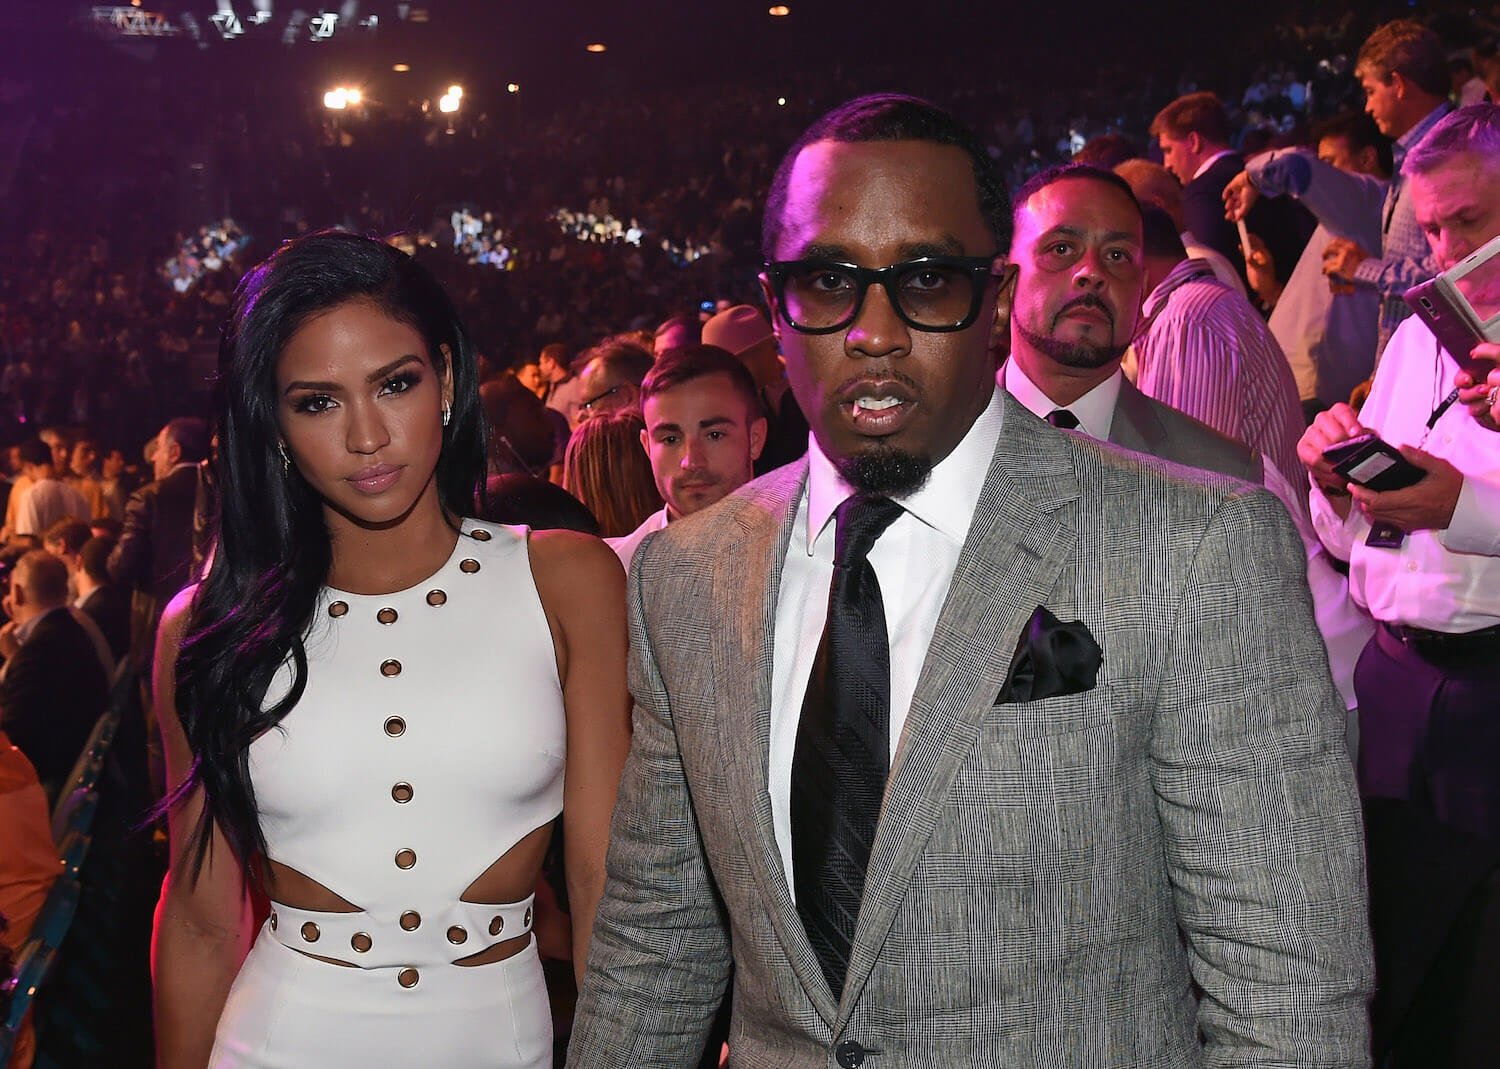 Casandra 'Cassie' Ventura and Sean 'P. Diddy' Combs in 2015 in a crowd bathed in pink light